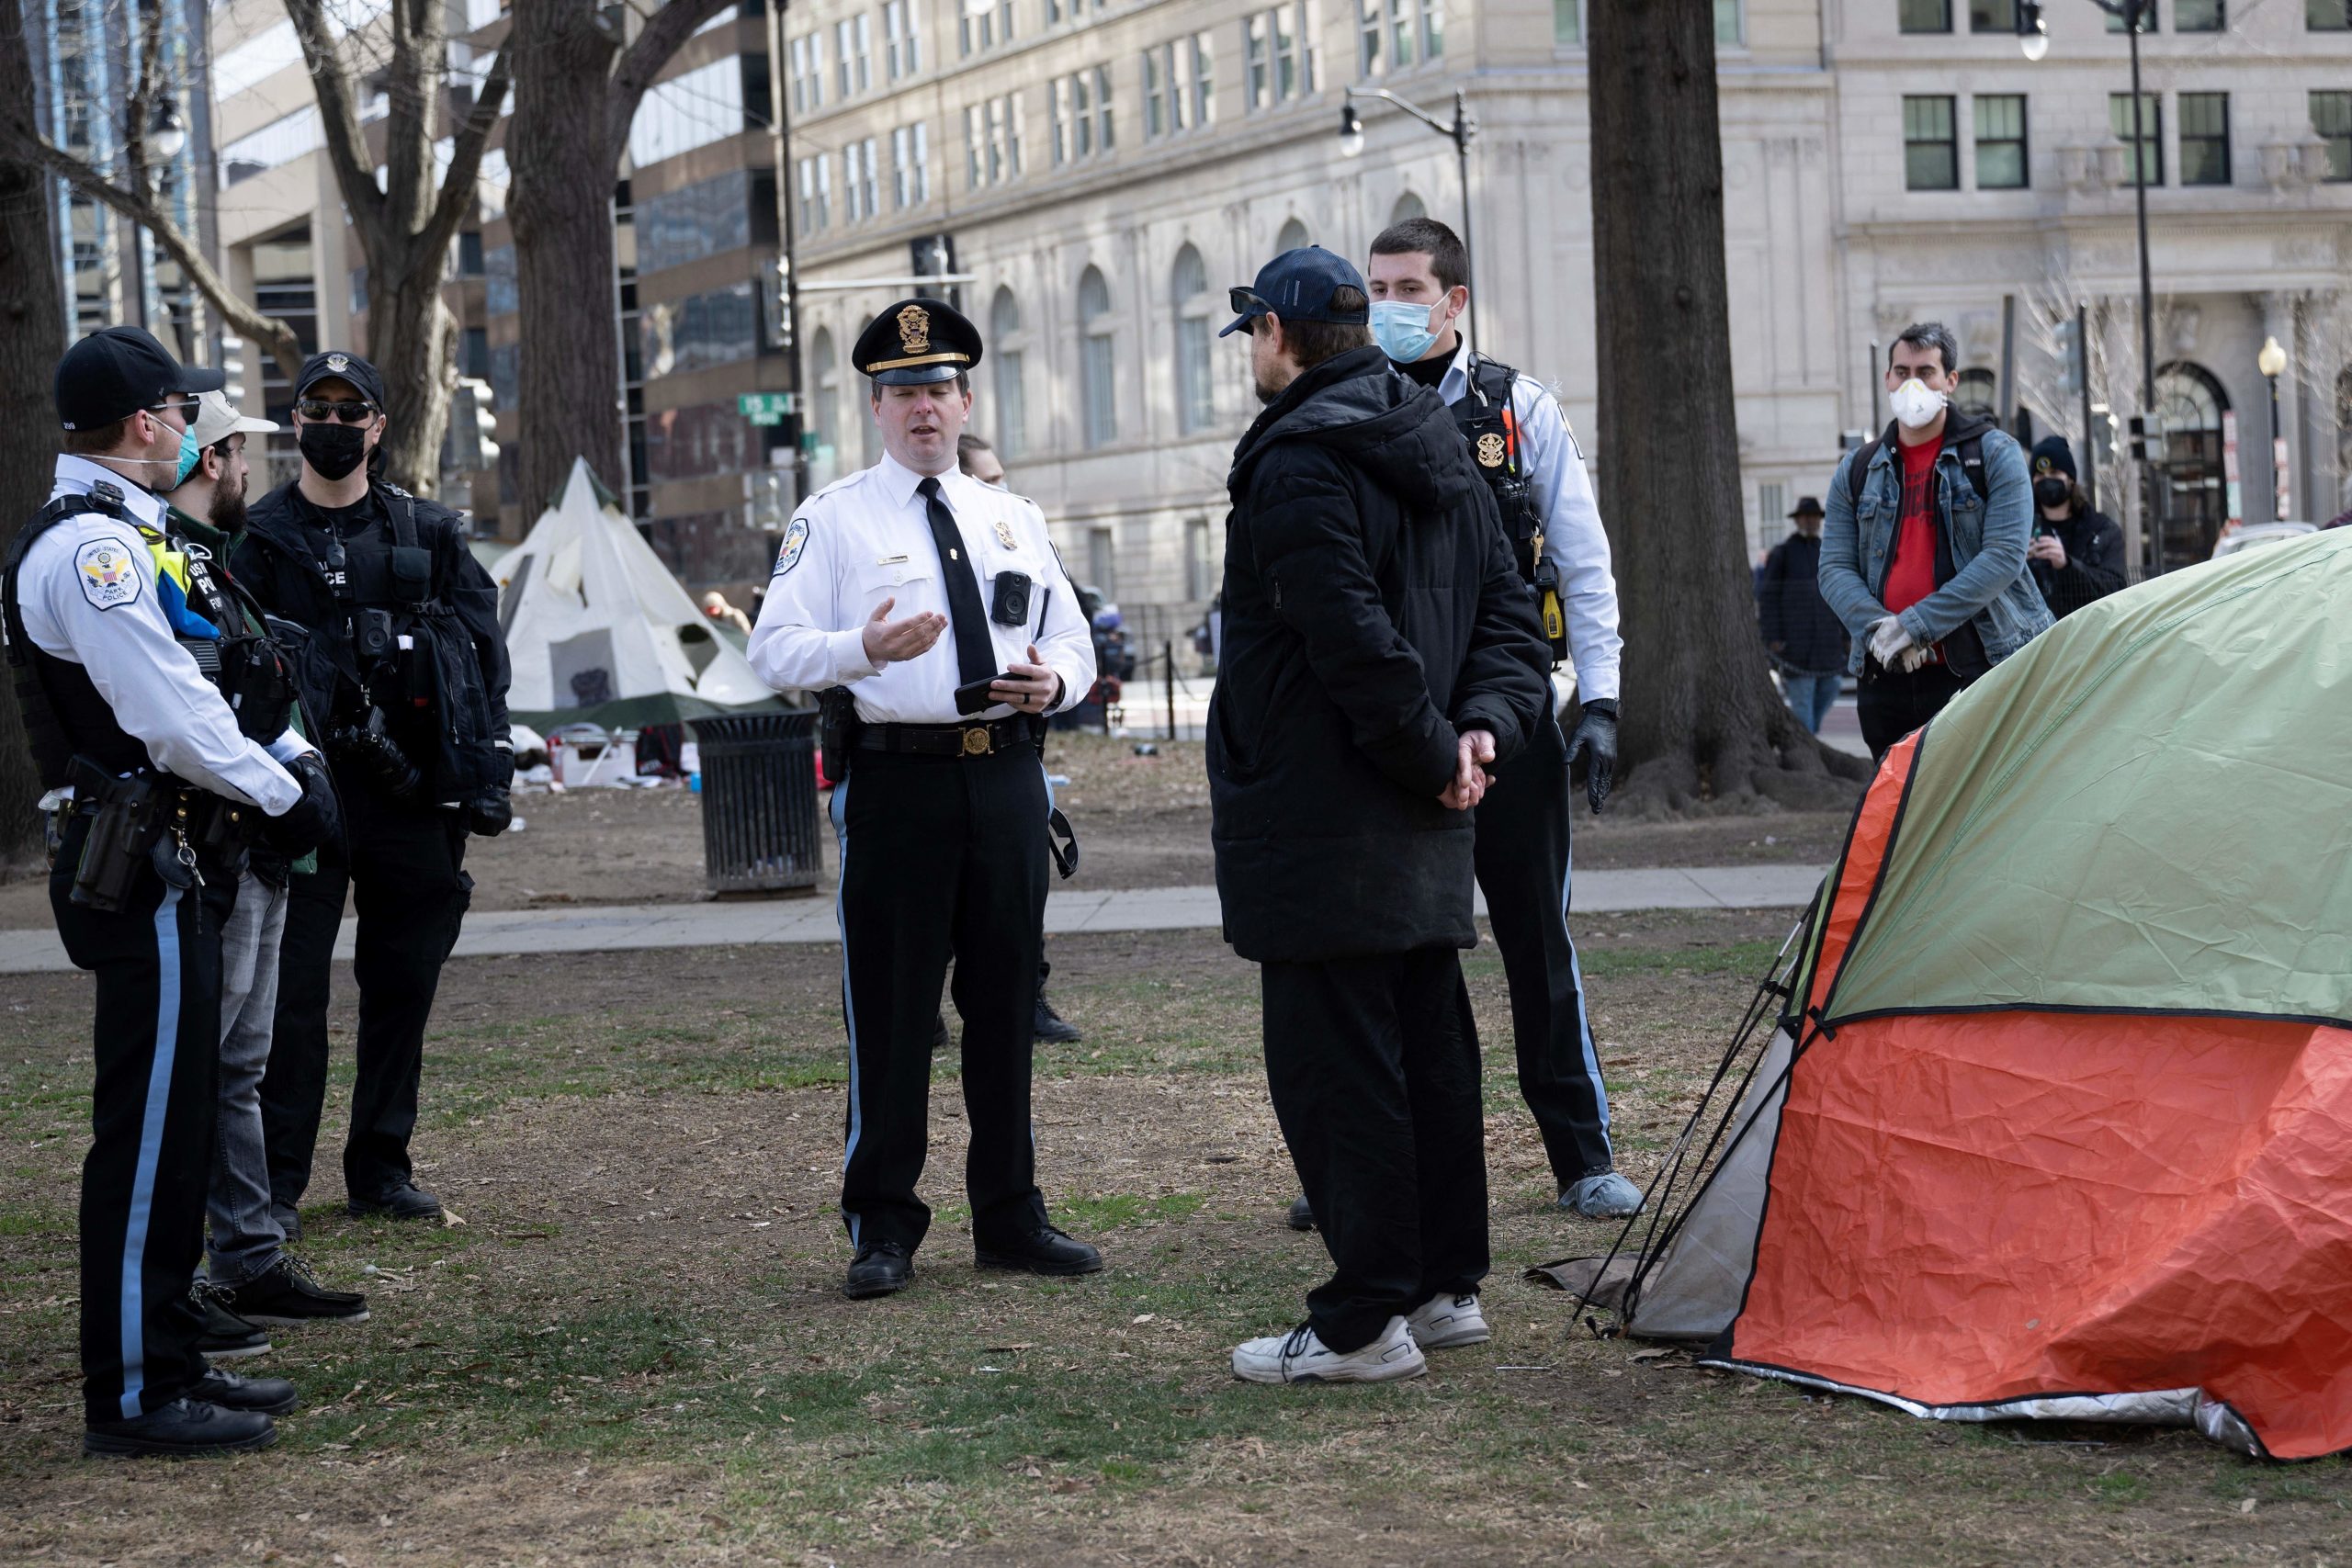 Park Police argue with a man who did not want to leave as members of the US National Park Service clear a homeless encampment from McPherson Square, two blocks from the White House, on February 15, 2023 in Washington, DC. - Some 56 people live in the federal park, which is being cleared ahead of the initial April schedule due to safety concerns. (Photo by Brendan Smialowski / AFP) (Photo by BRENDAN SMIALOWSKI/AFP via Getty Images)